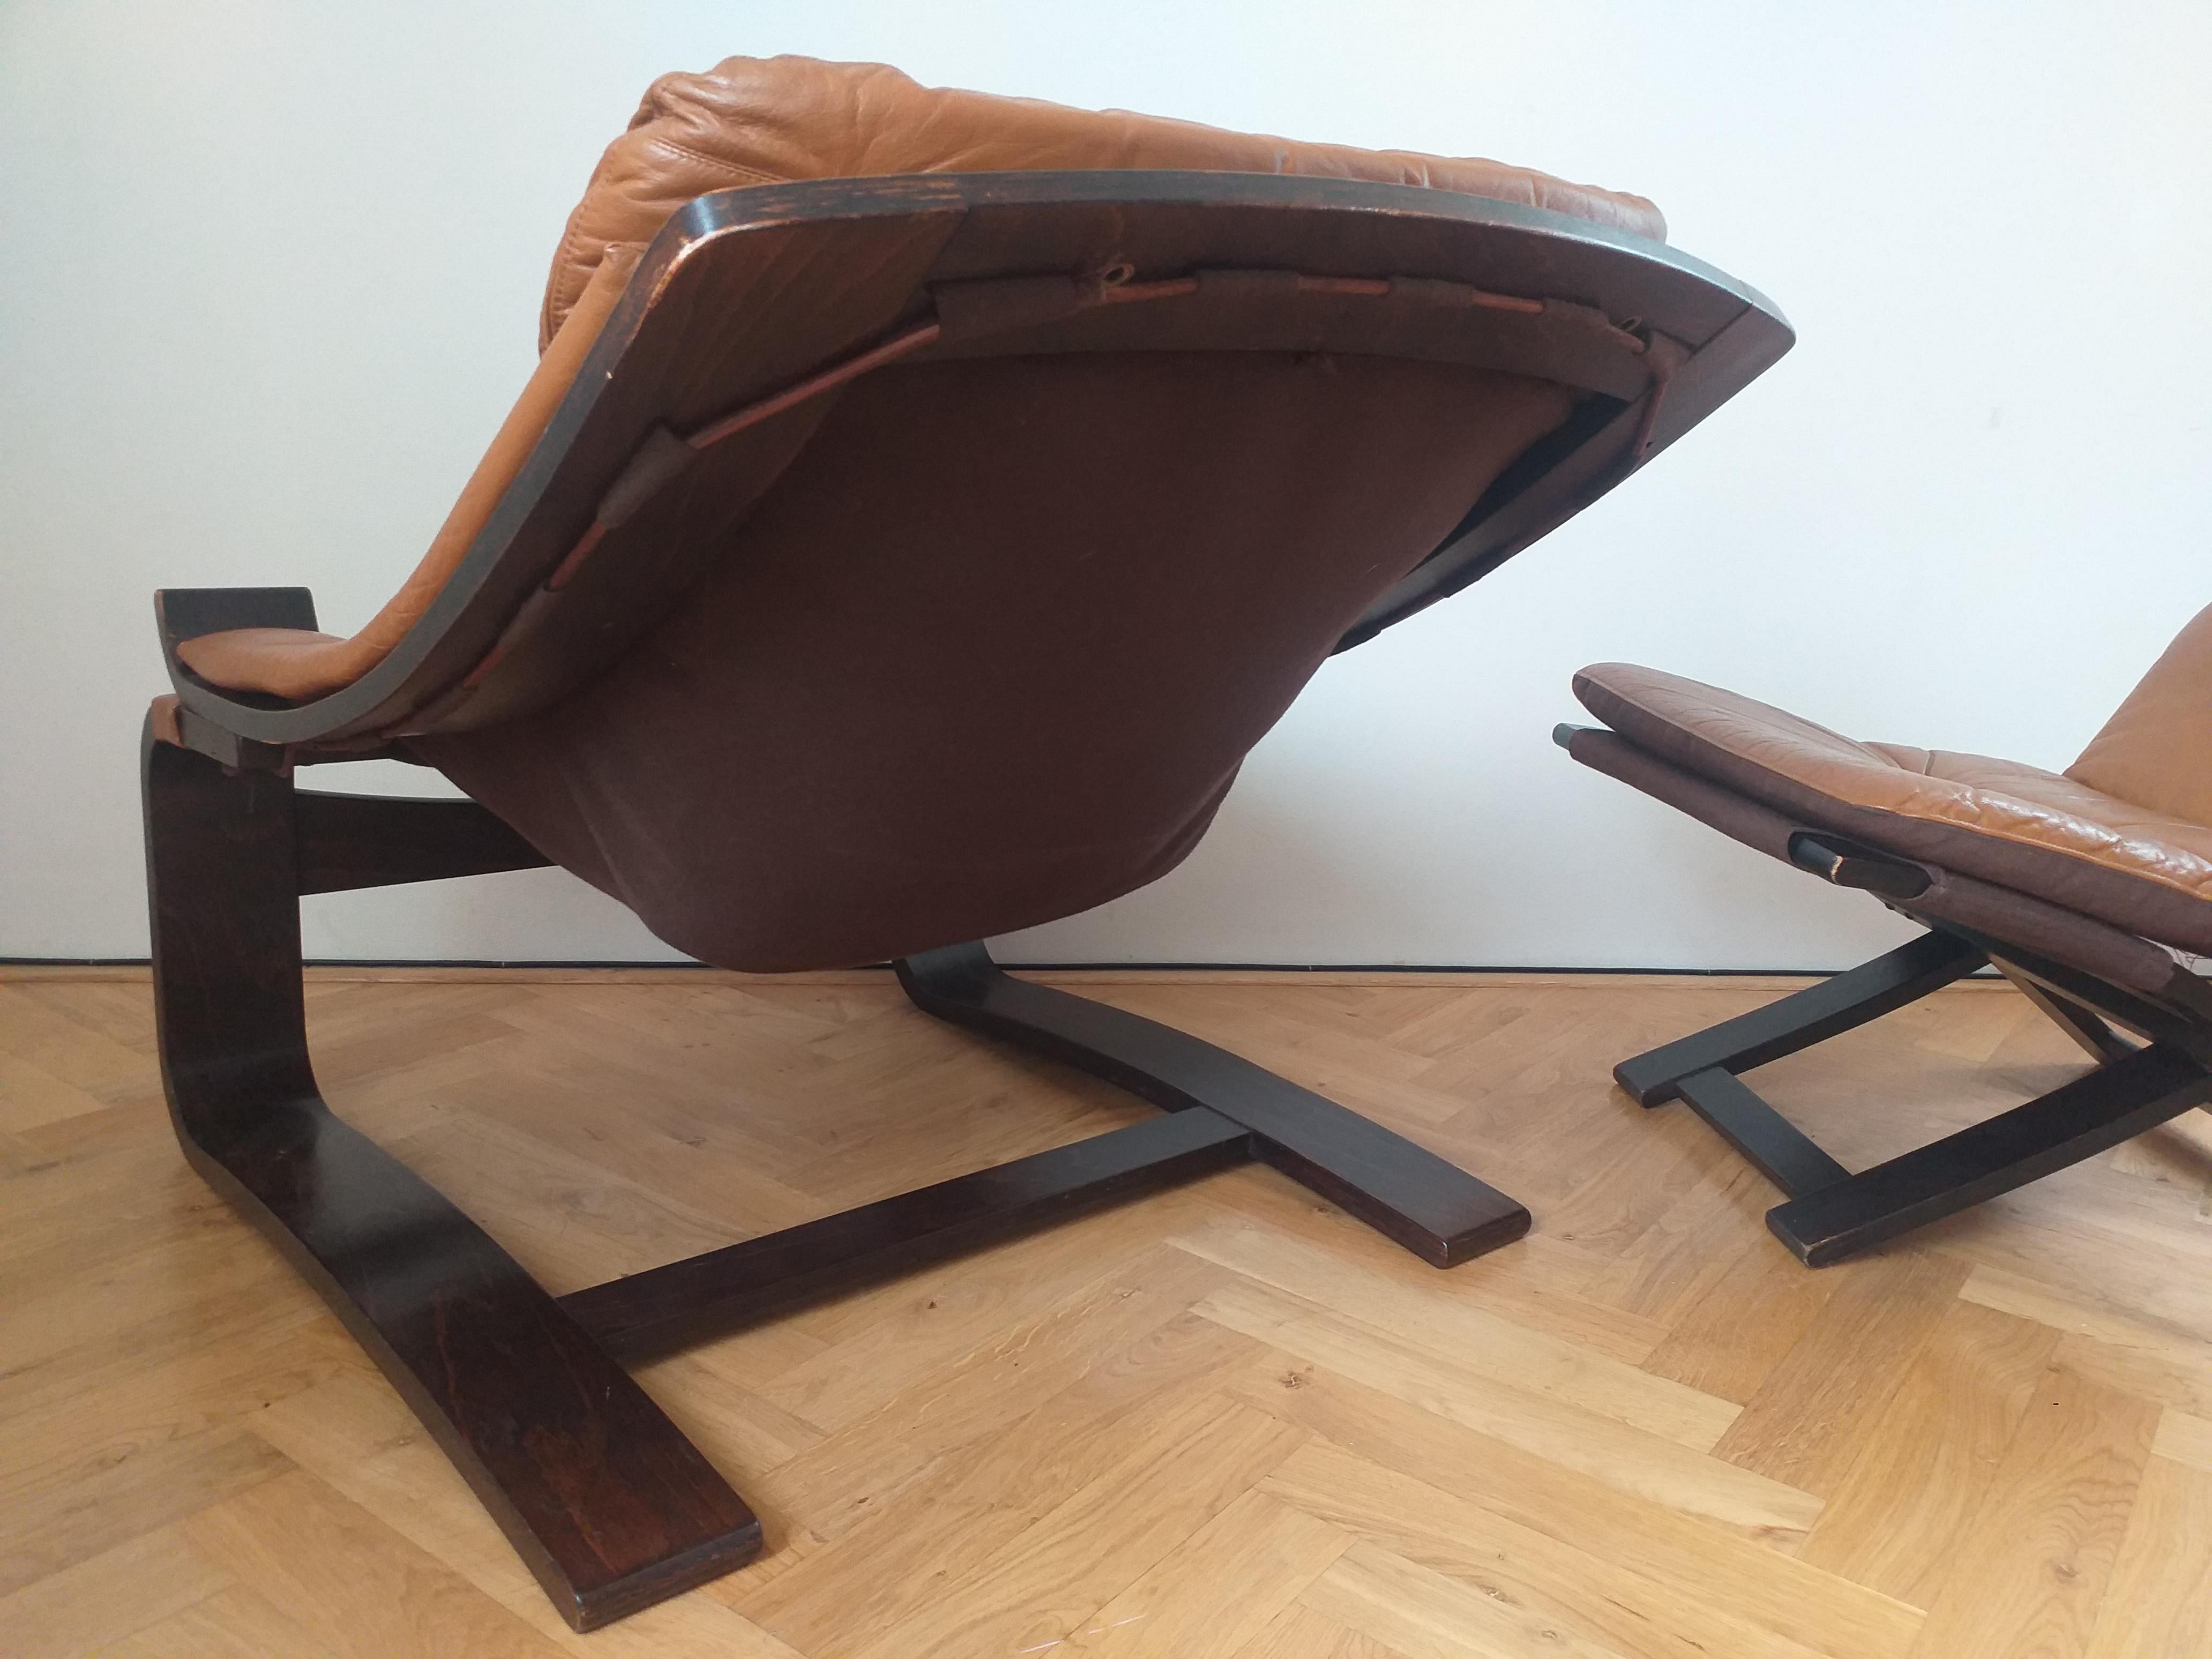 Midcentury Lounge Chair Kroken with Ottoman, Ake Fribytter, Nelo, Sweden, 1970s For Sale 2